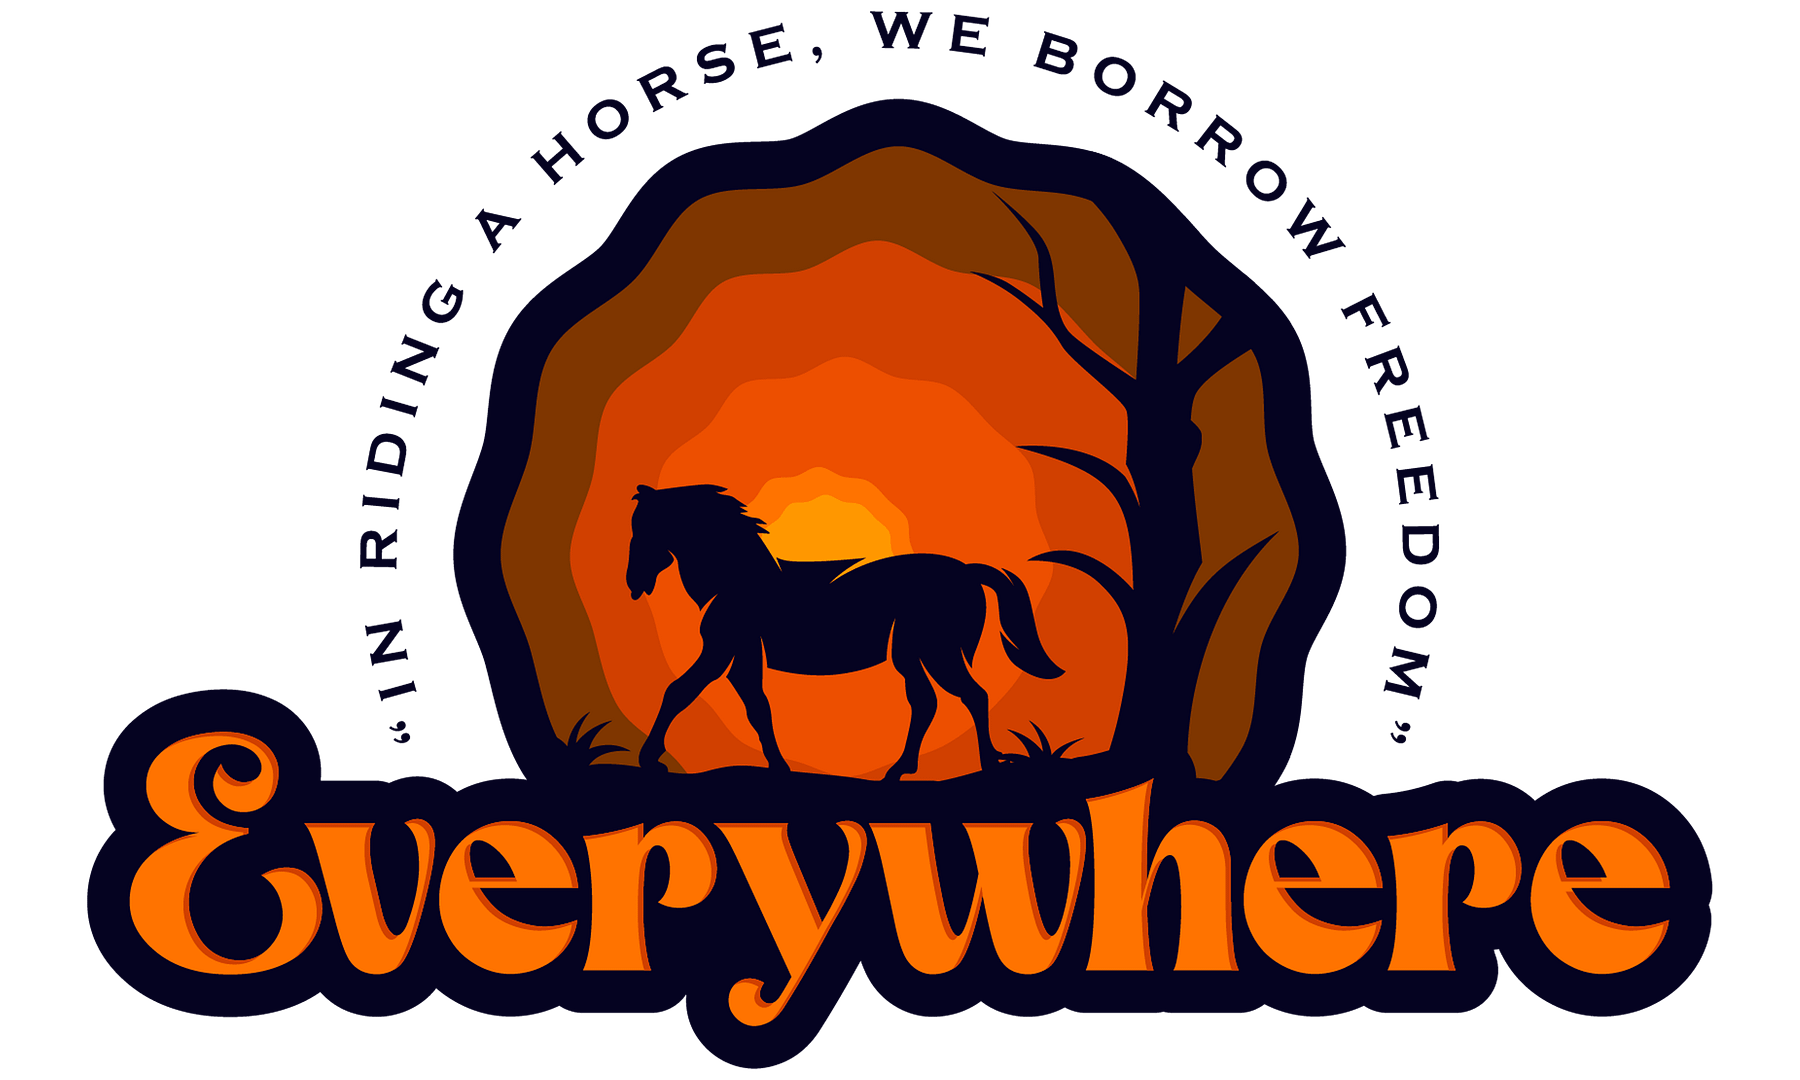 The logo for Horse Riding Tours In Georgia, with an image of a horse and a sunset.